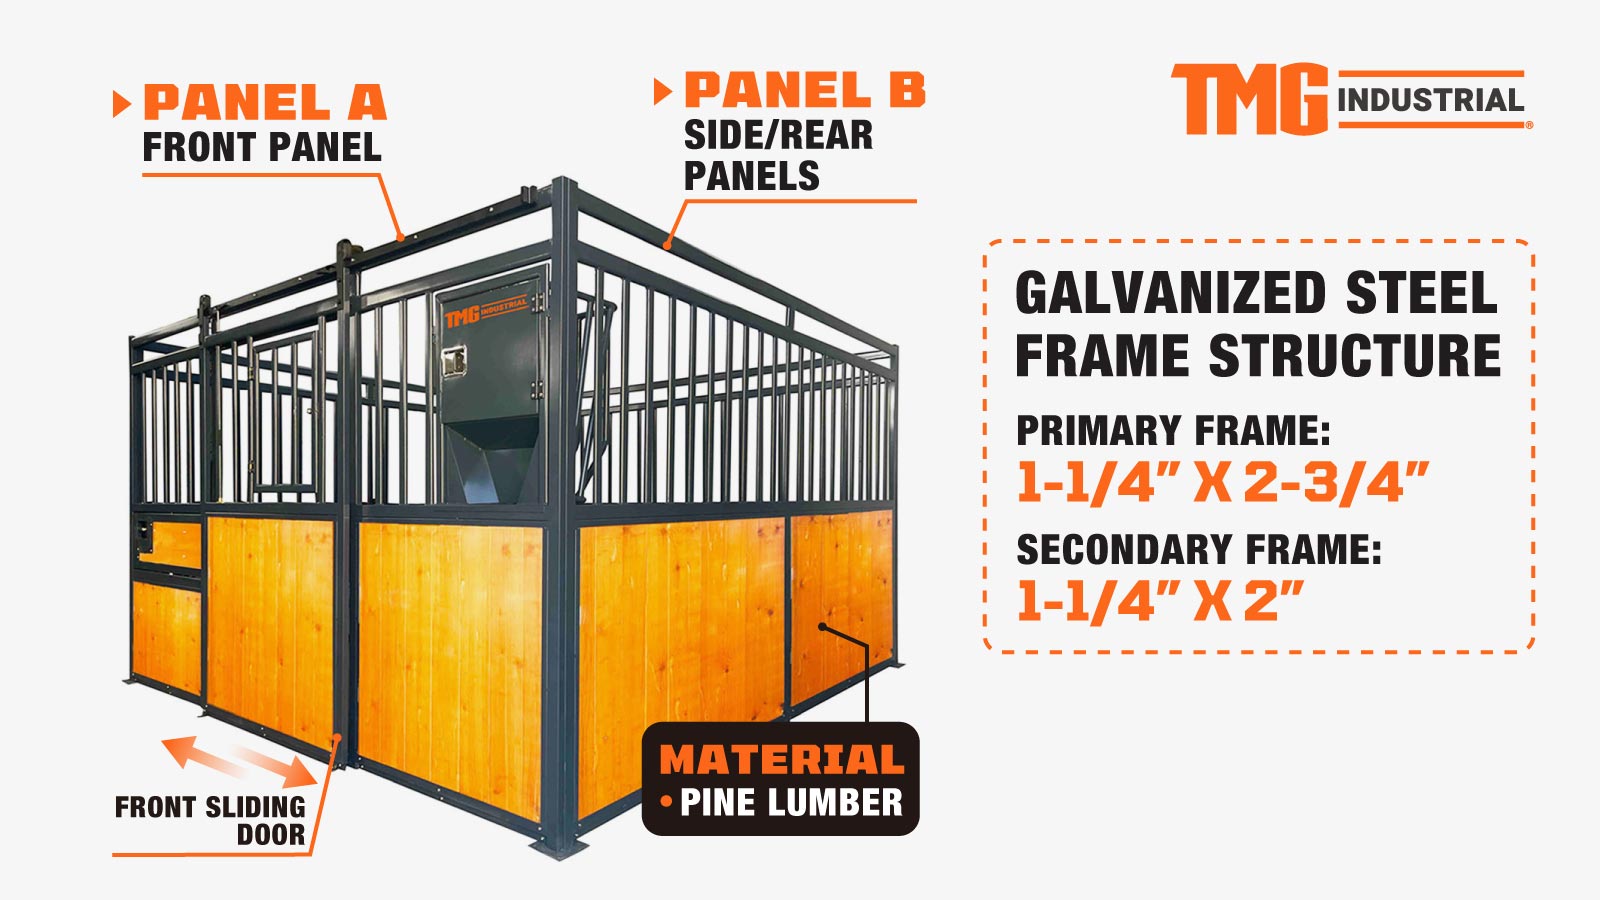 TMG Industrial 12’ Horse Stall Pine Lumber Panel, Vertical Bar Top & Wood-Filled Bottom, Front panel c/w Window/Feeder and Sliding Door, TMG-FHS12A and FHS12B-description-image